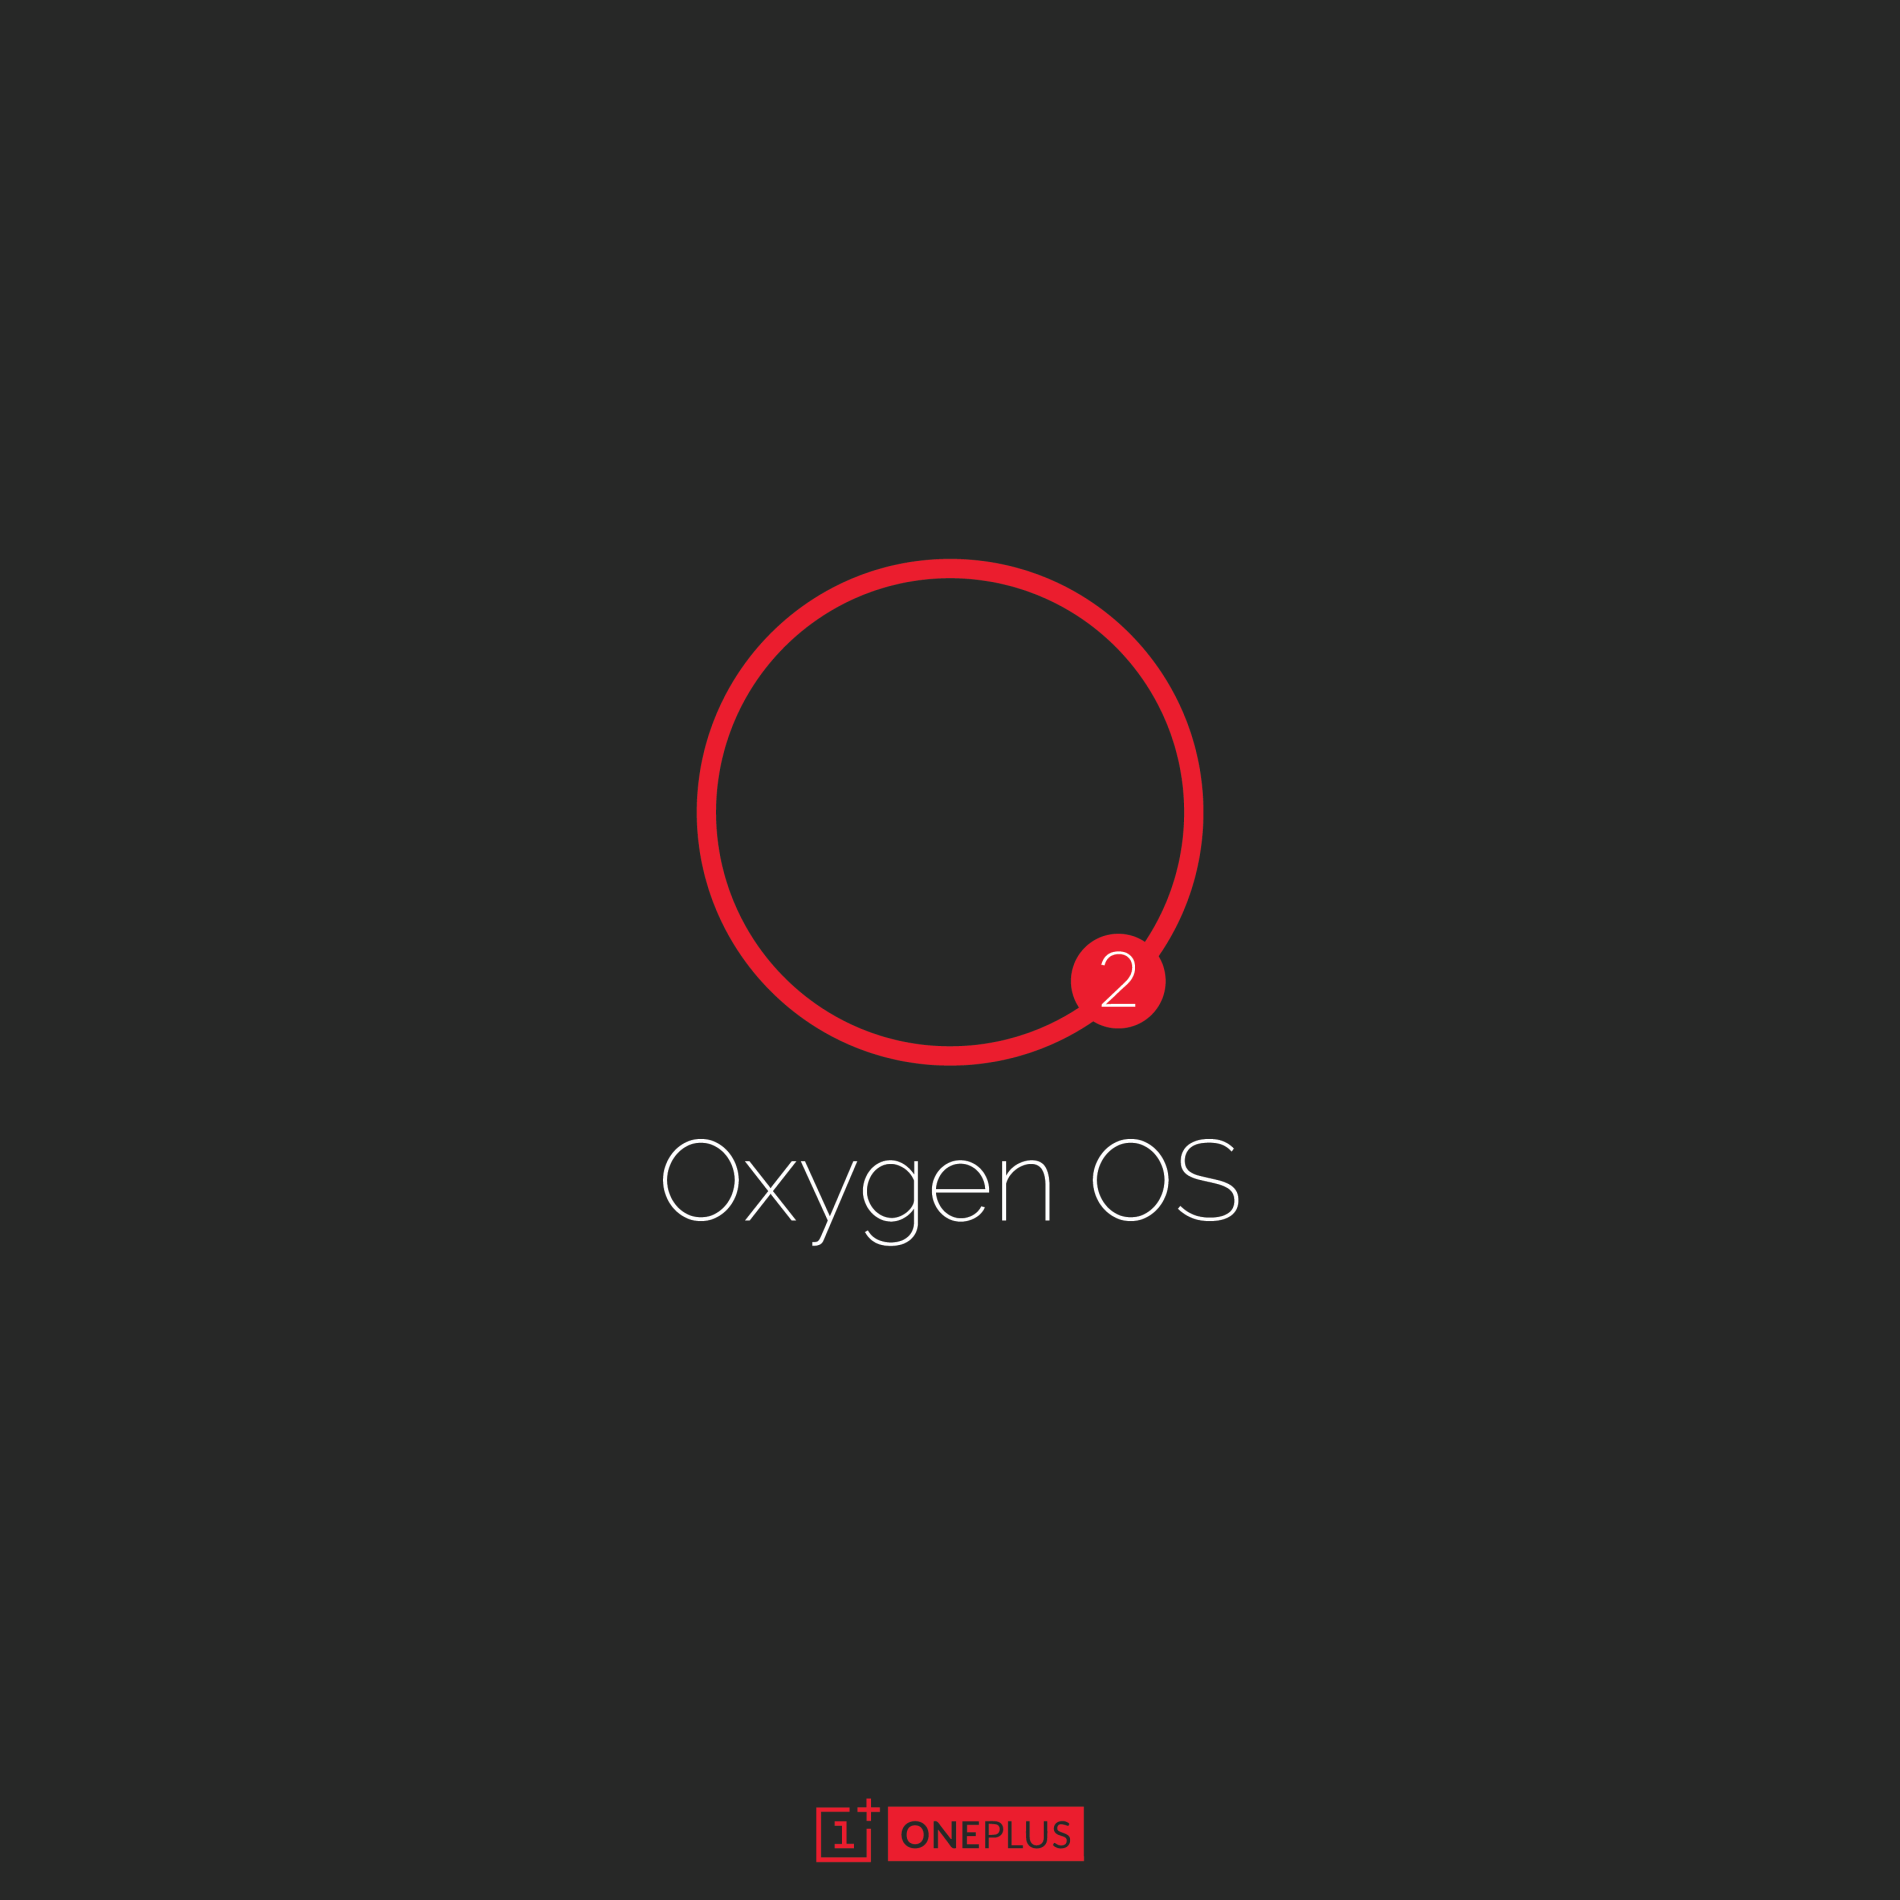 OS Logo - OnePlus Forum Gives Birth to Oxygen OS Logo and Matching Boot